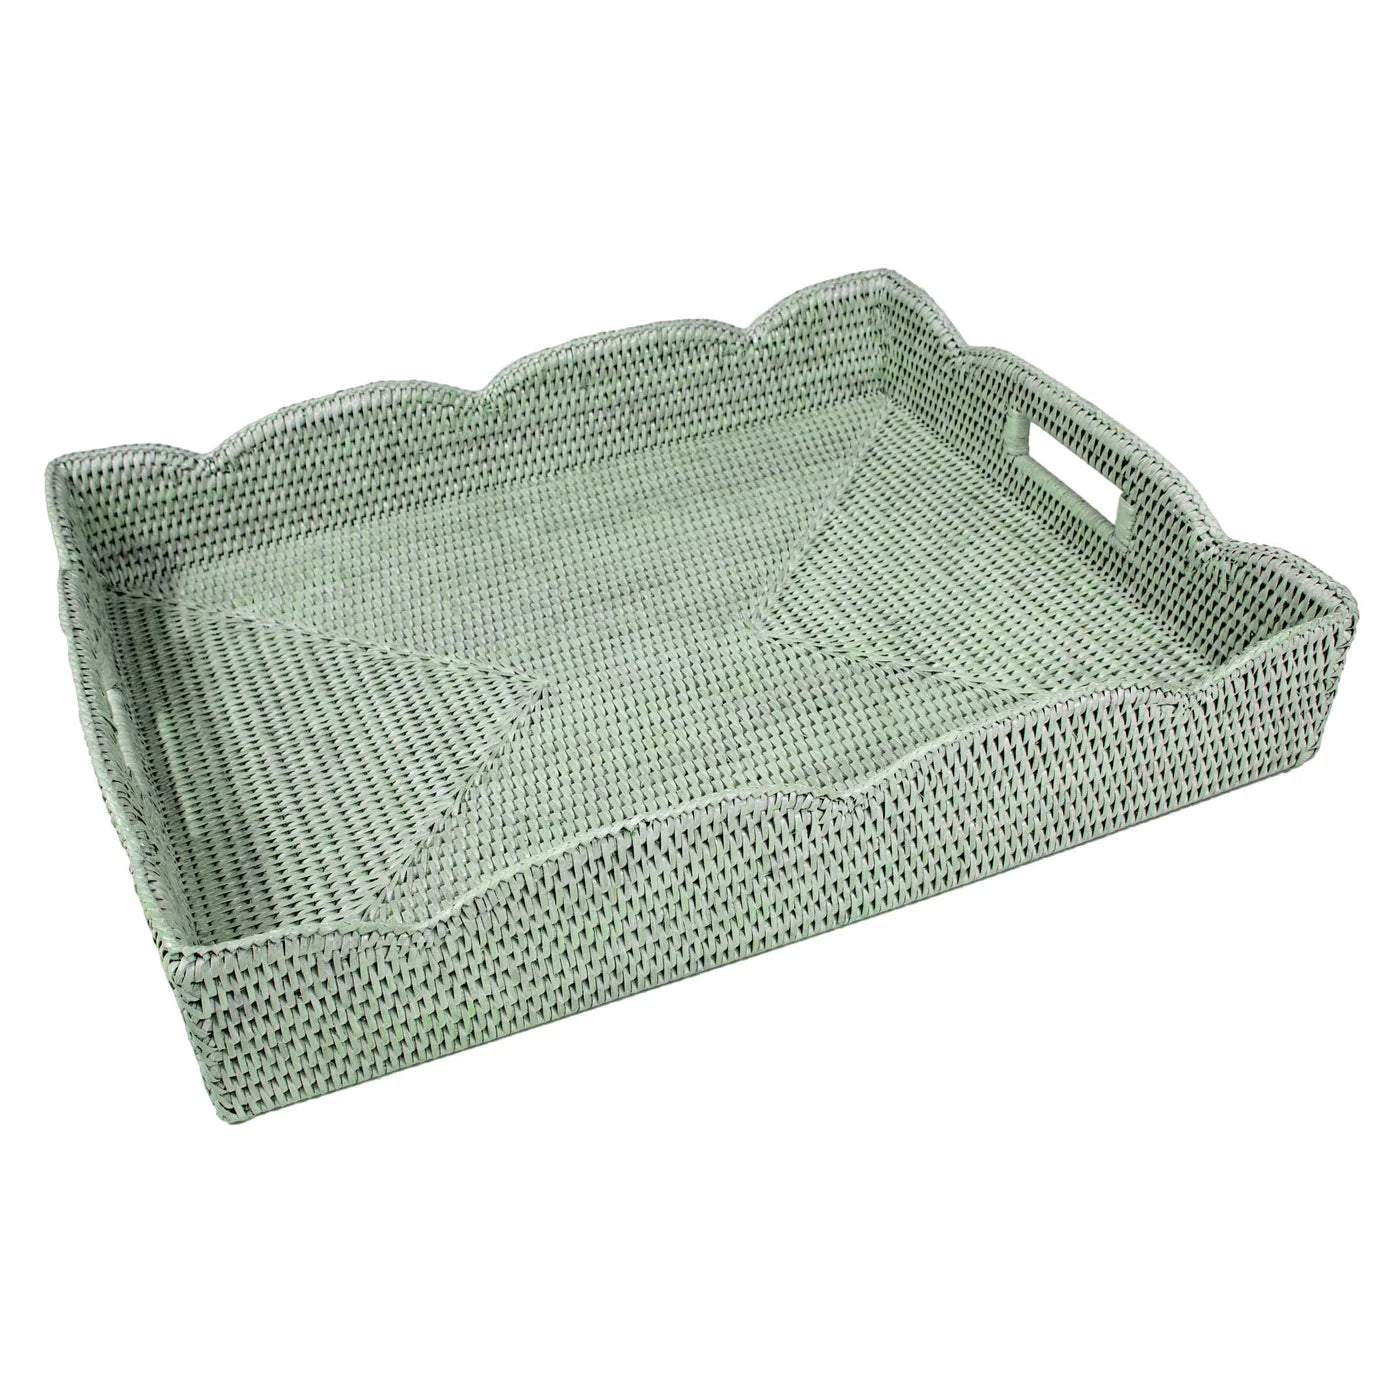 Rattan Scalloped Large Tray in Green - The Preppy Bunny